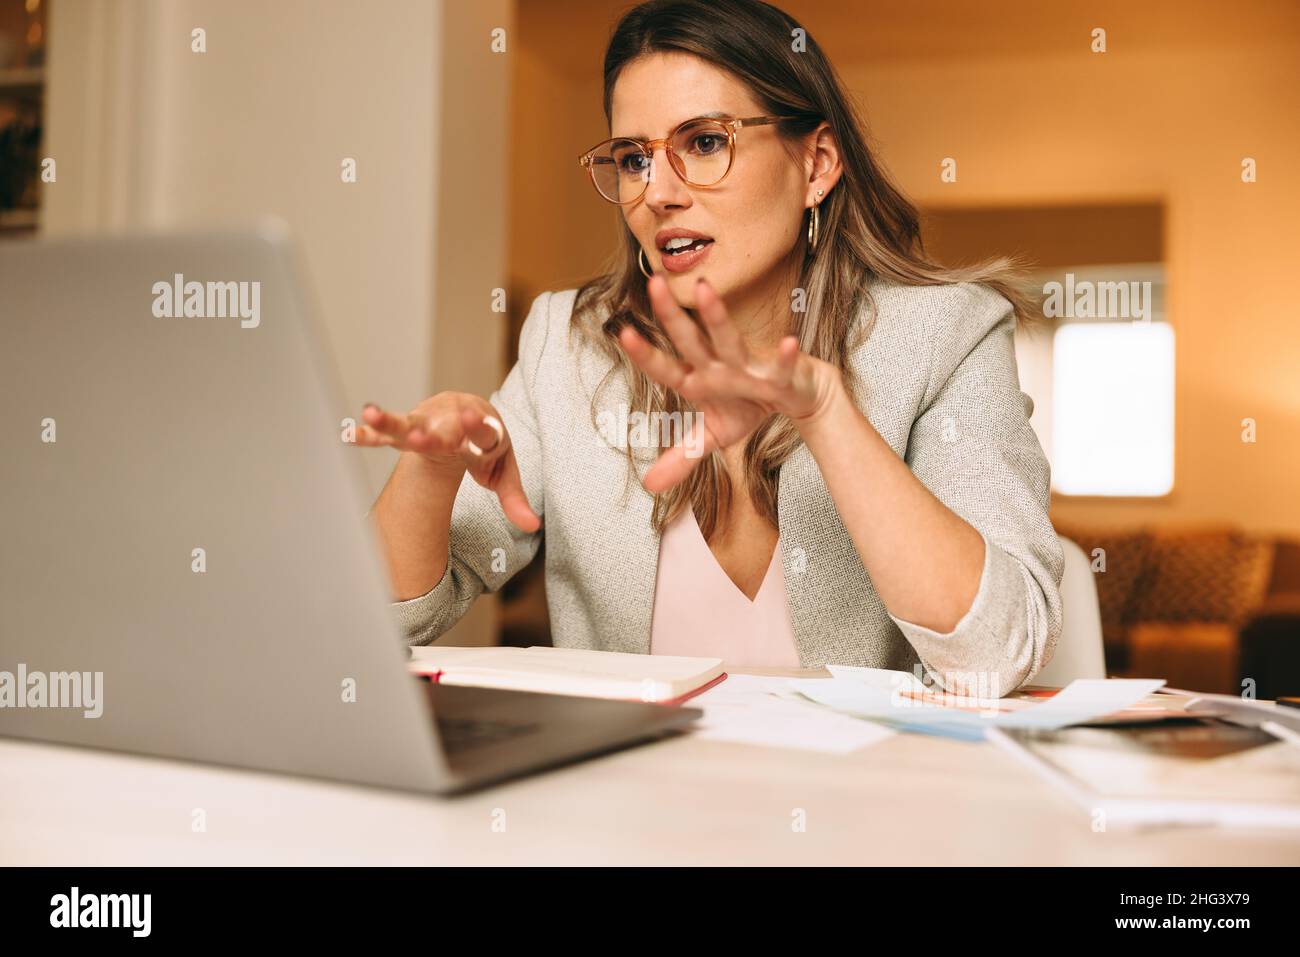 Smart interior designer explaining her plans during a virtual meeting. Creative businesswoman video calling her clients using a laptop. Female designe Stock Photo